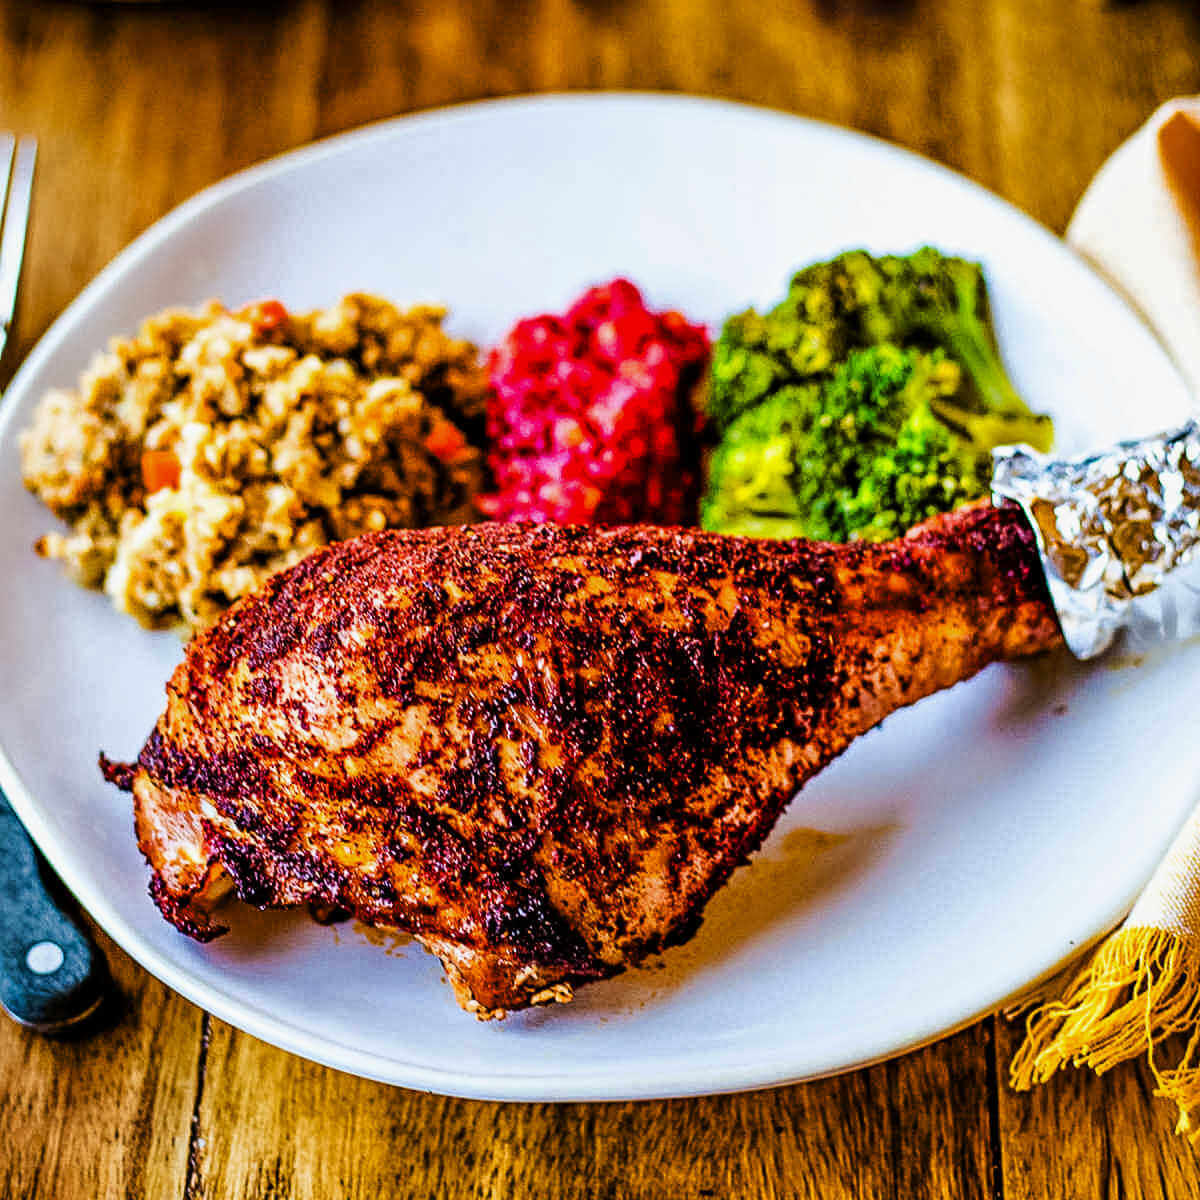 a roasted turkey leg on a white plate with sides on a wooden table